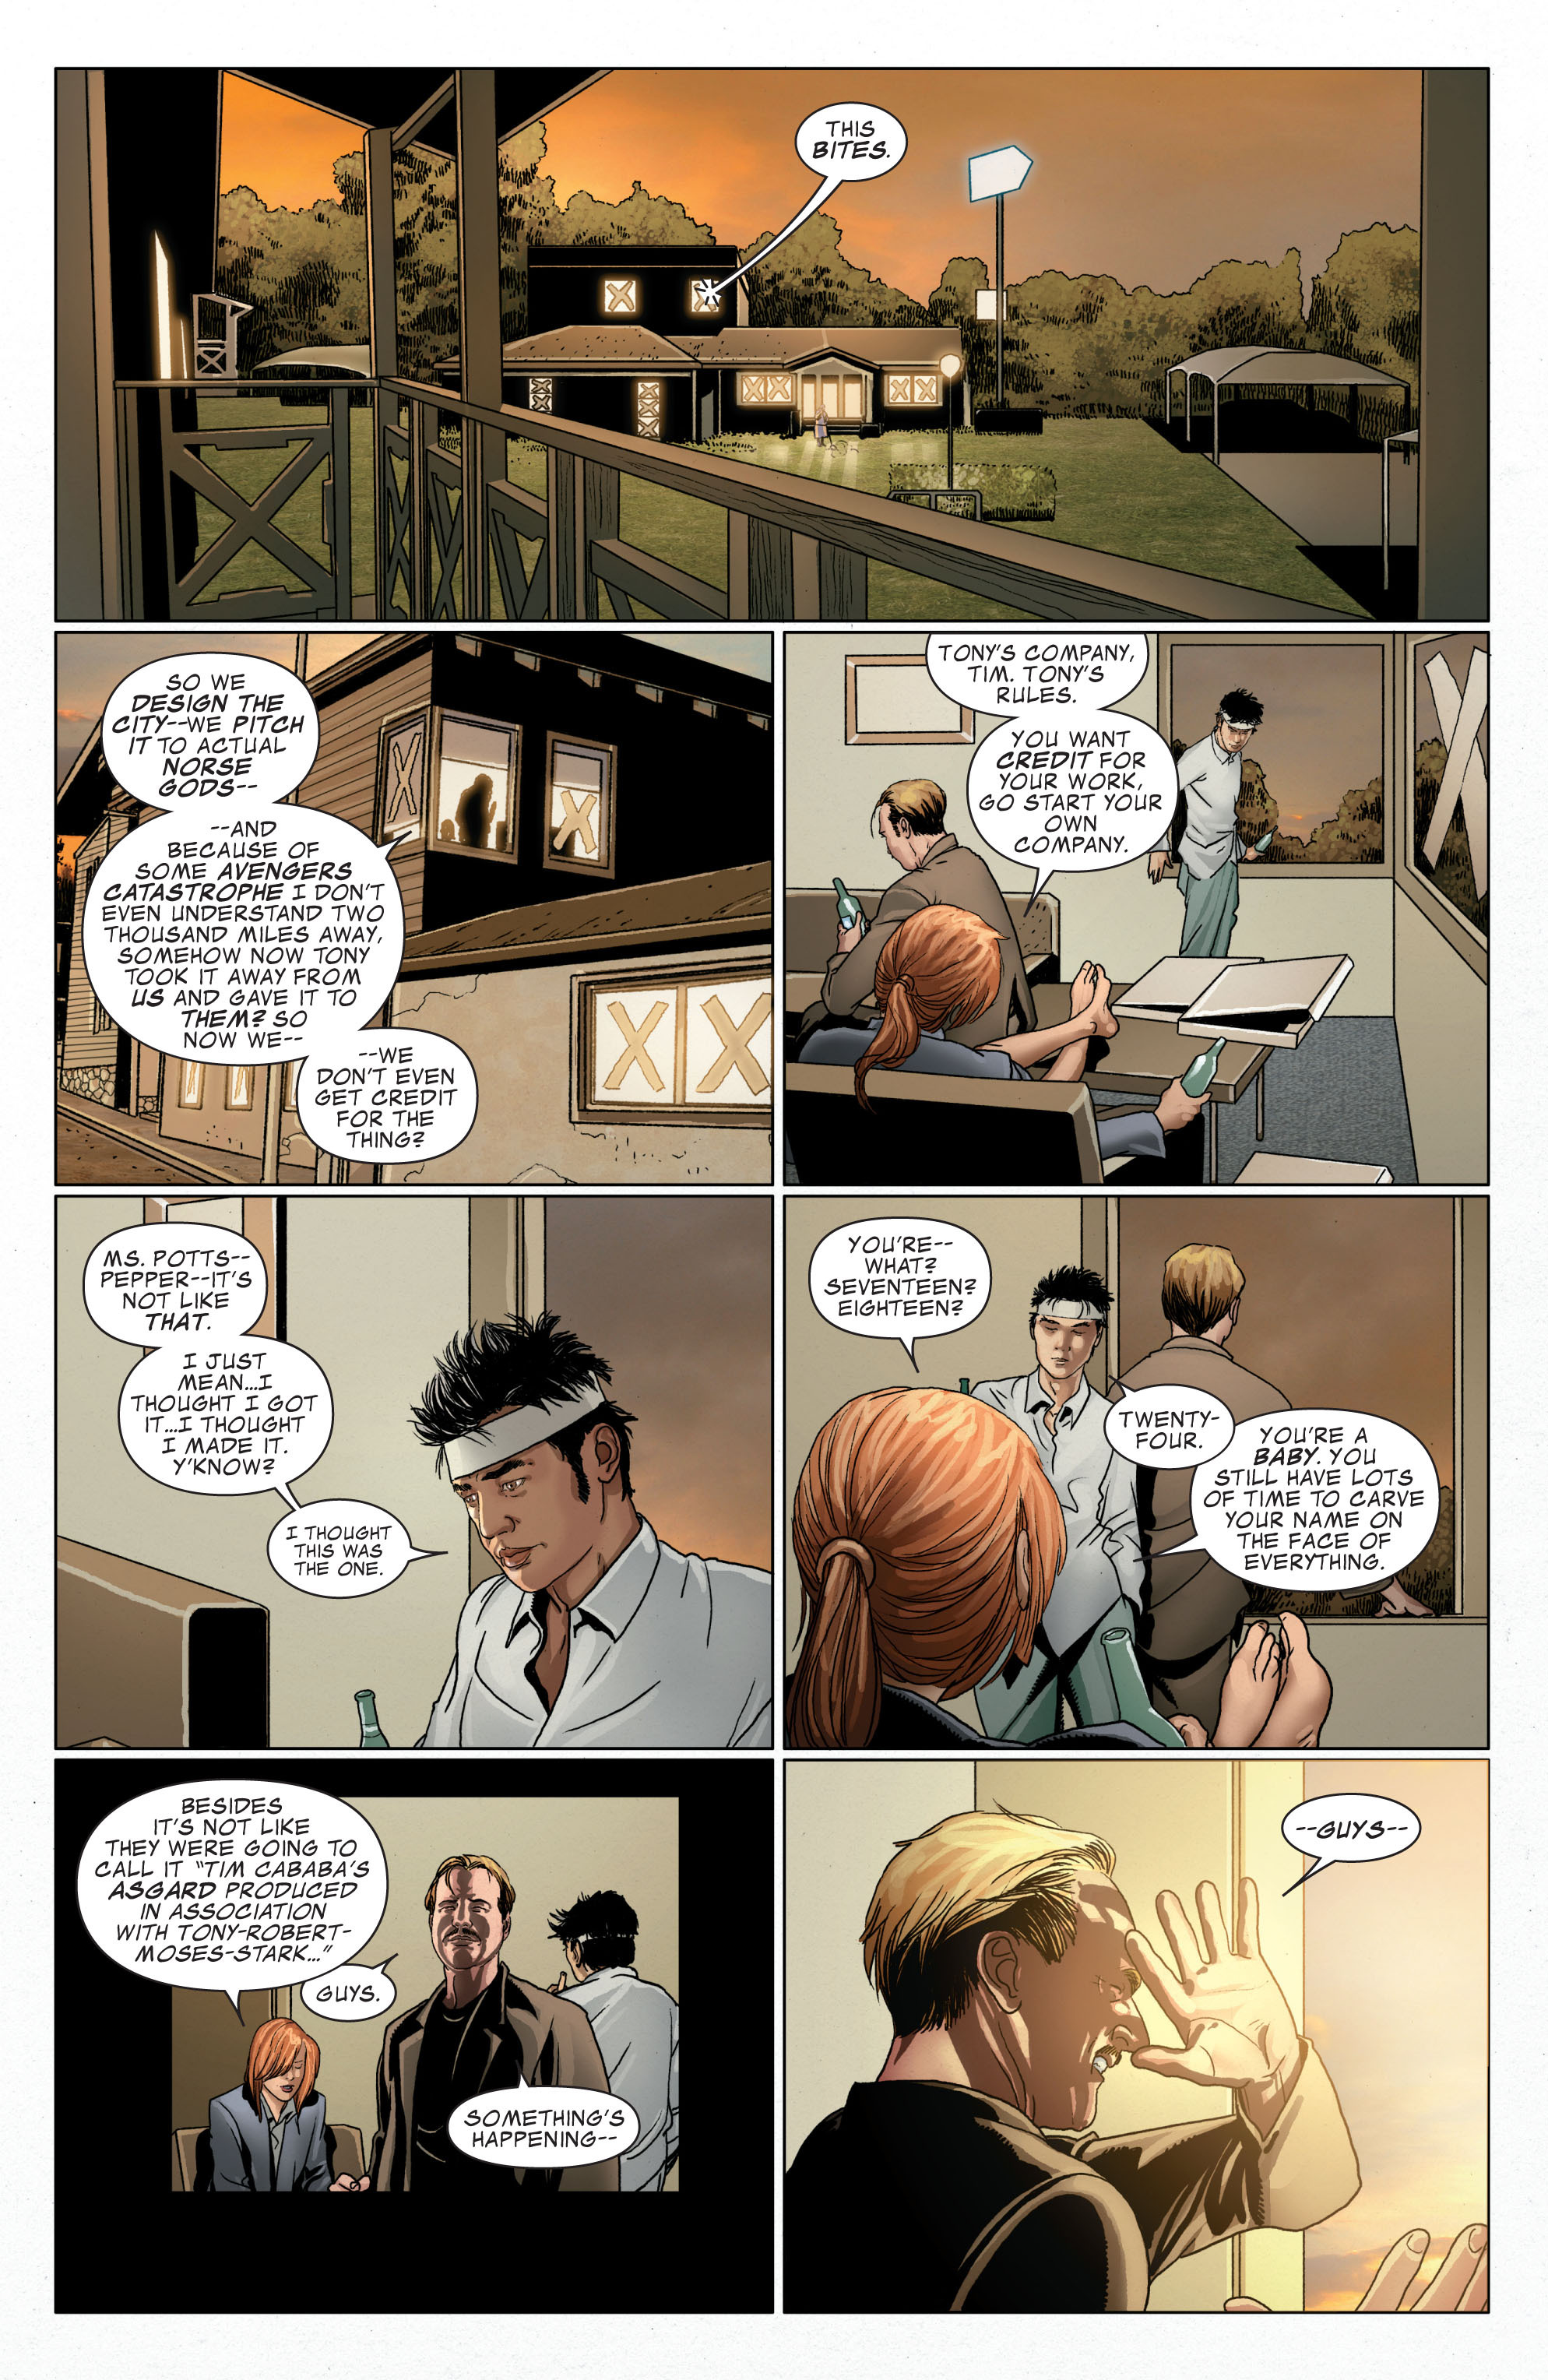 Invincible Iron Man (2008) 503 Page 21